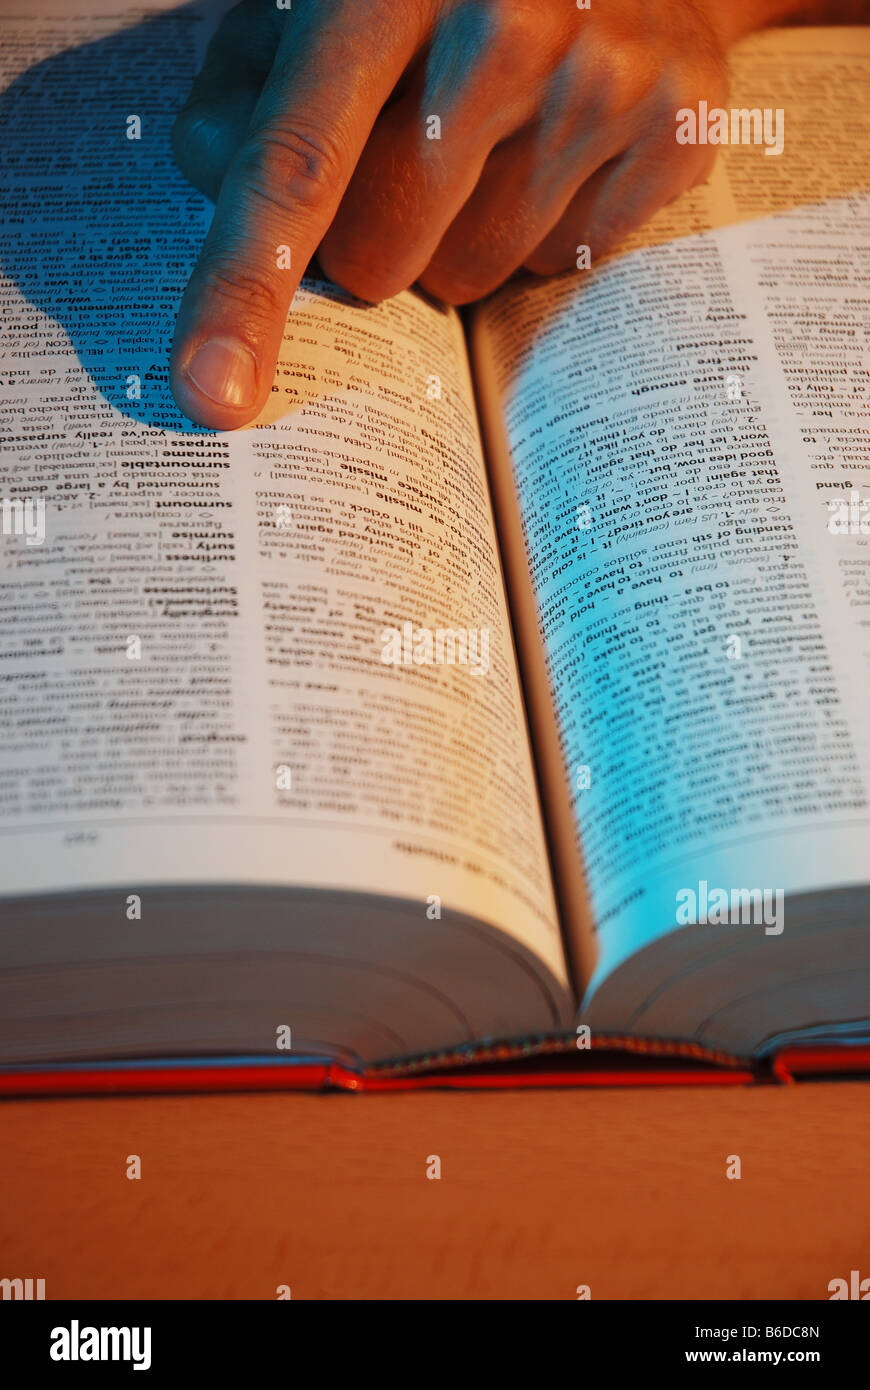 Man's index finger pointing to word in dictionary. Stock Photo